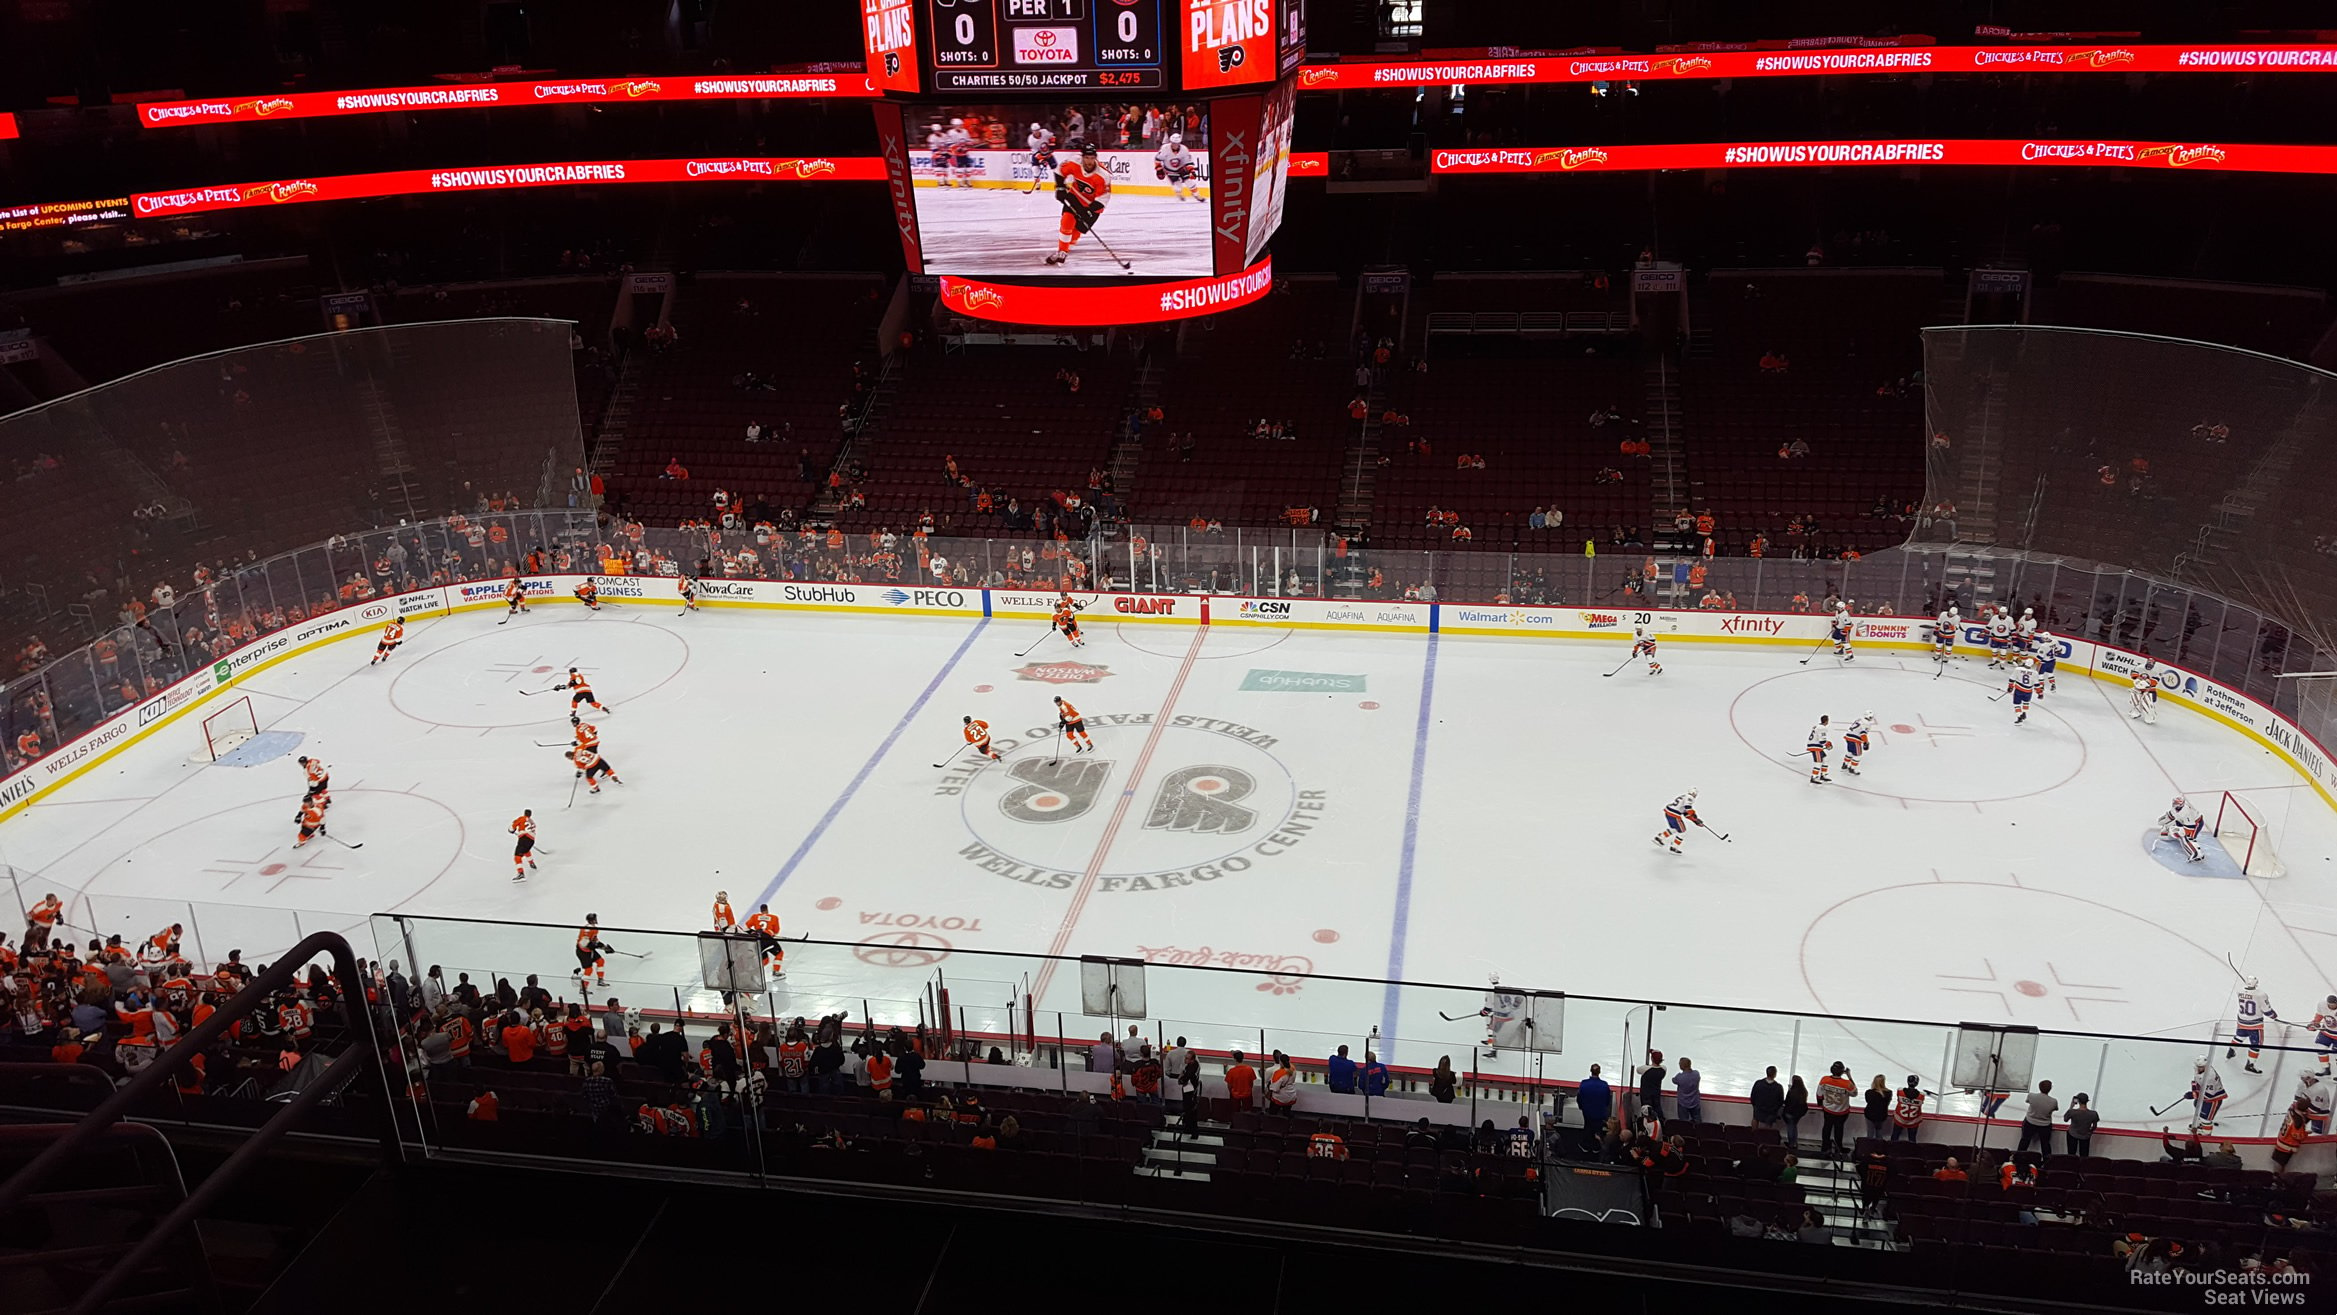 section 202, row 8 seat view  for hockey - wells fargo center